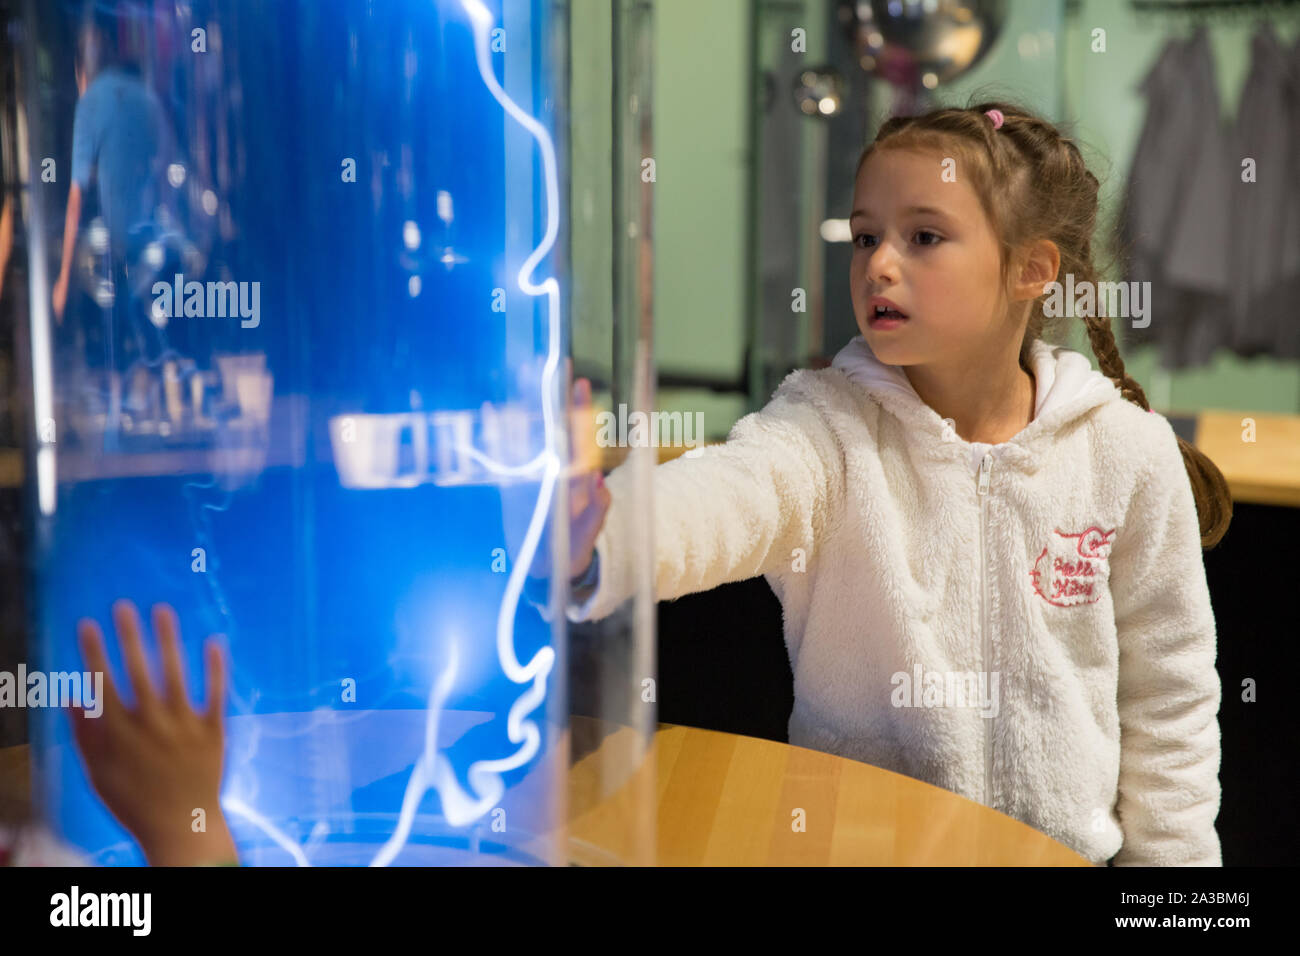 Helsinki, Finland - June 10, 2019: Finnish science center Heureka in Vantaa. Child studying electrical discharges in a lab. Stock Photo